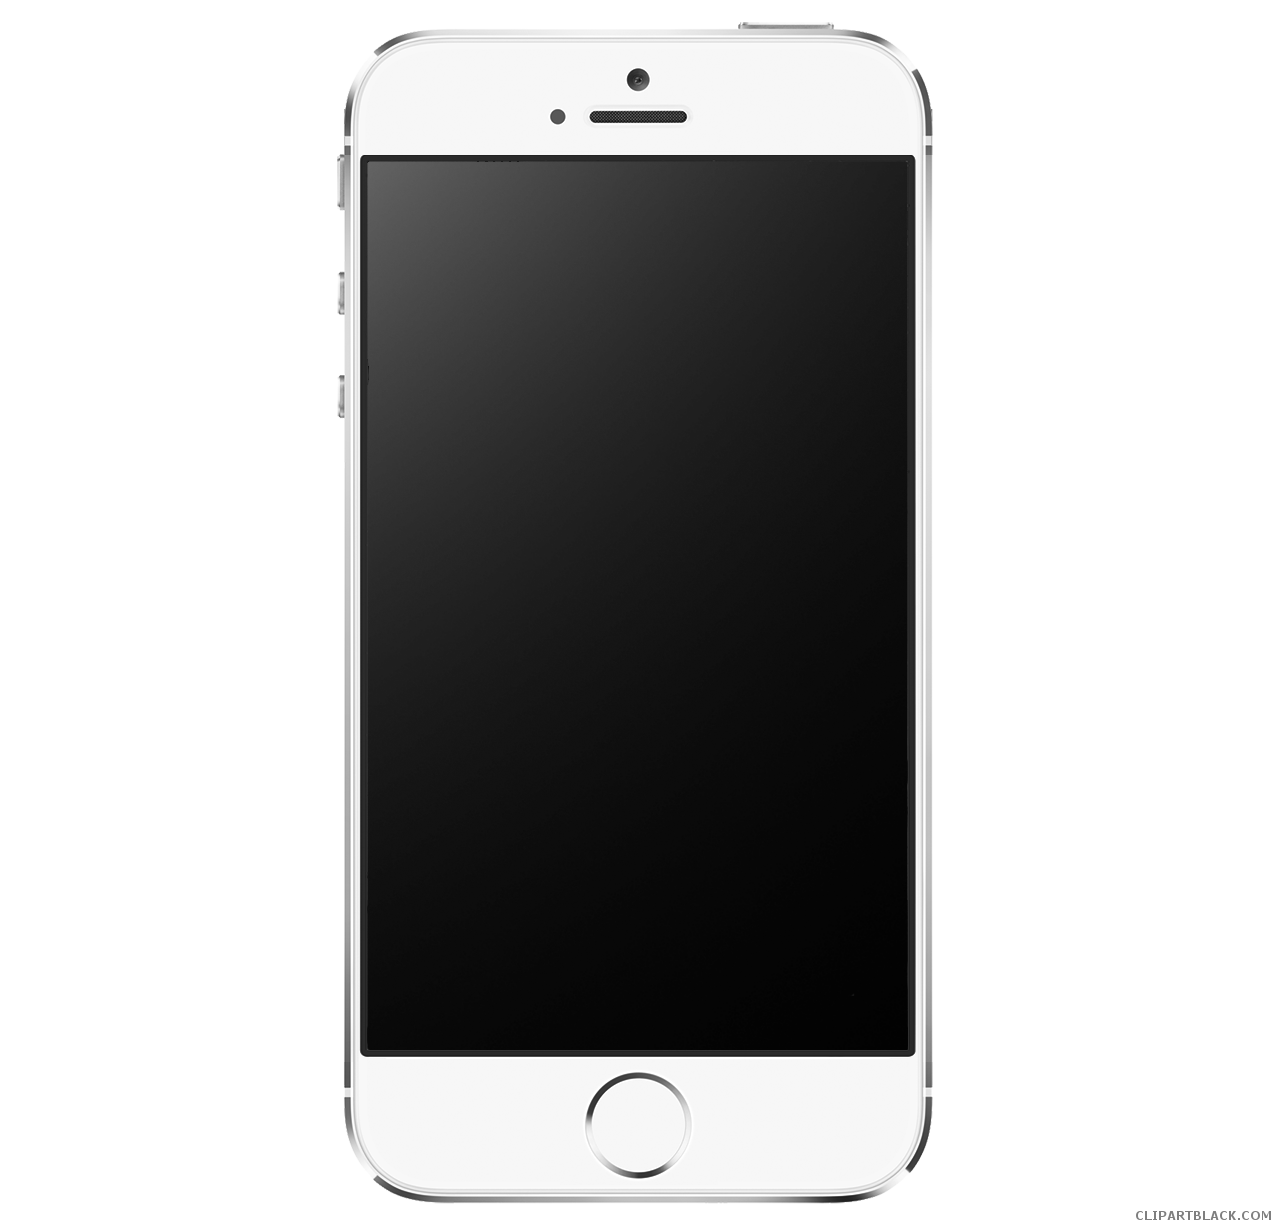 iphone clipart black and white